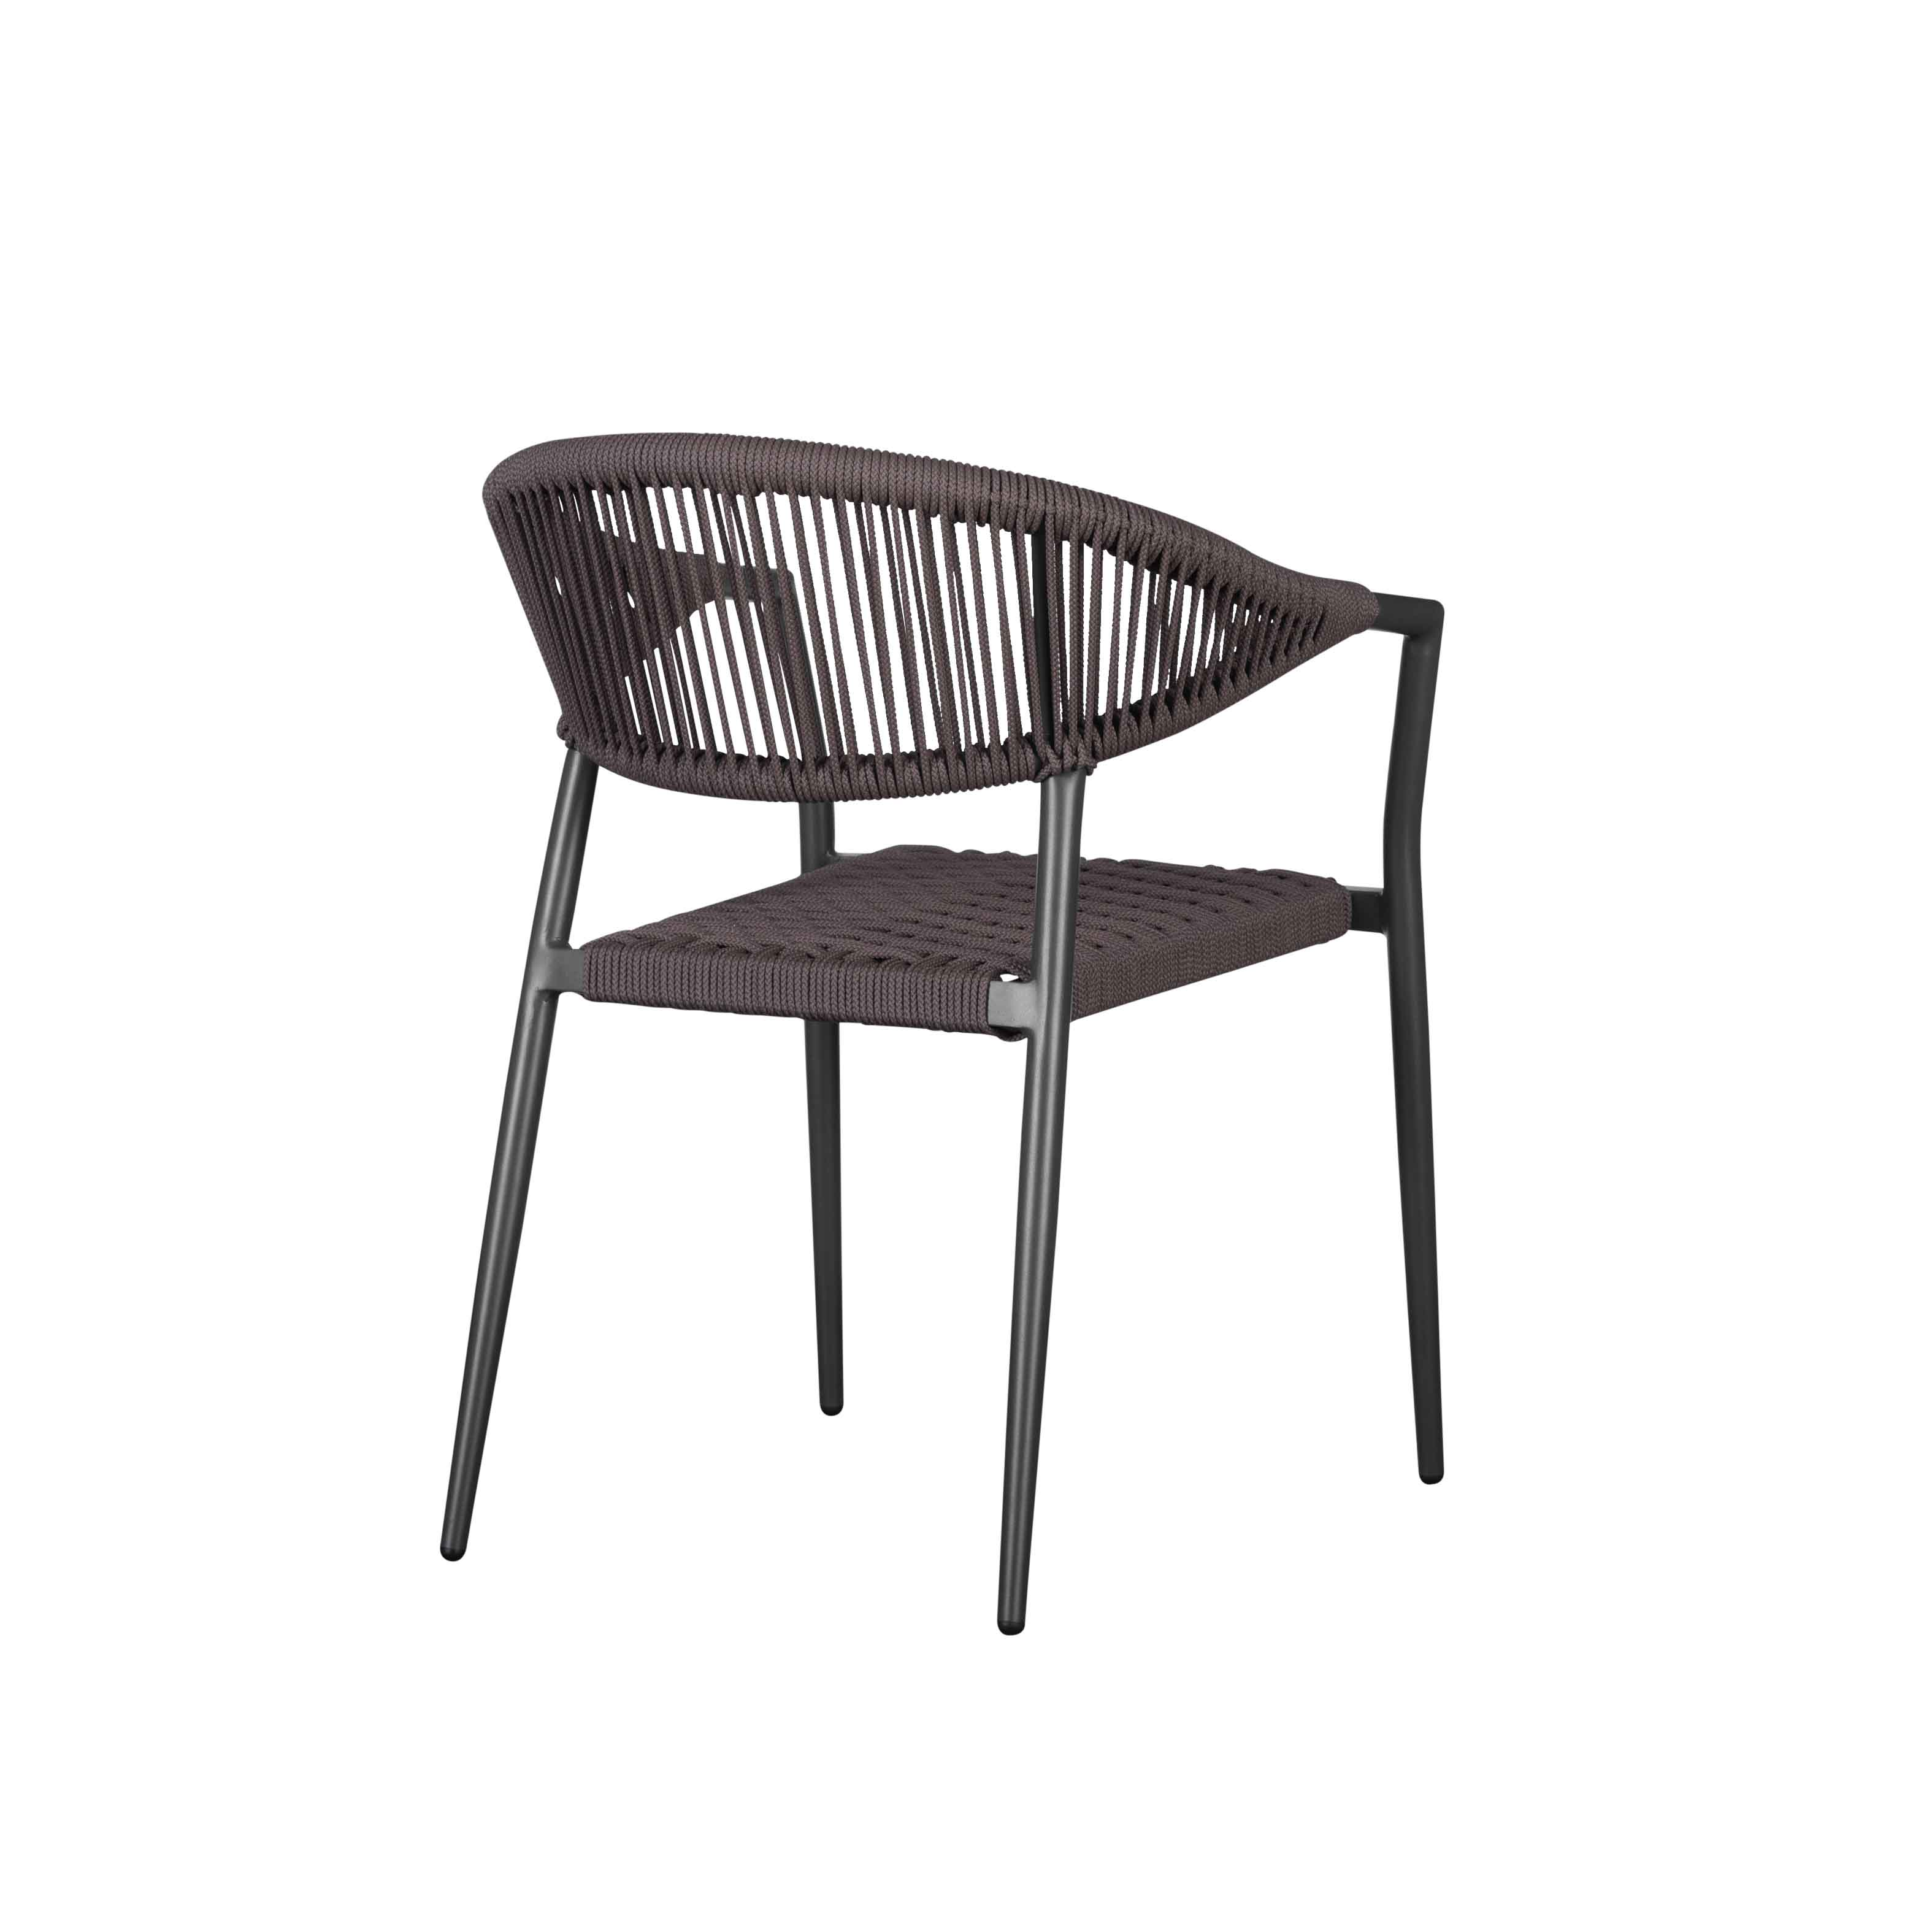 Camila rope dining chair S2